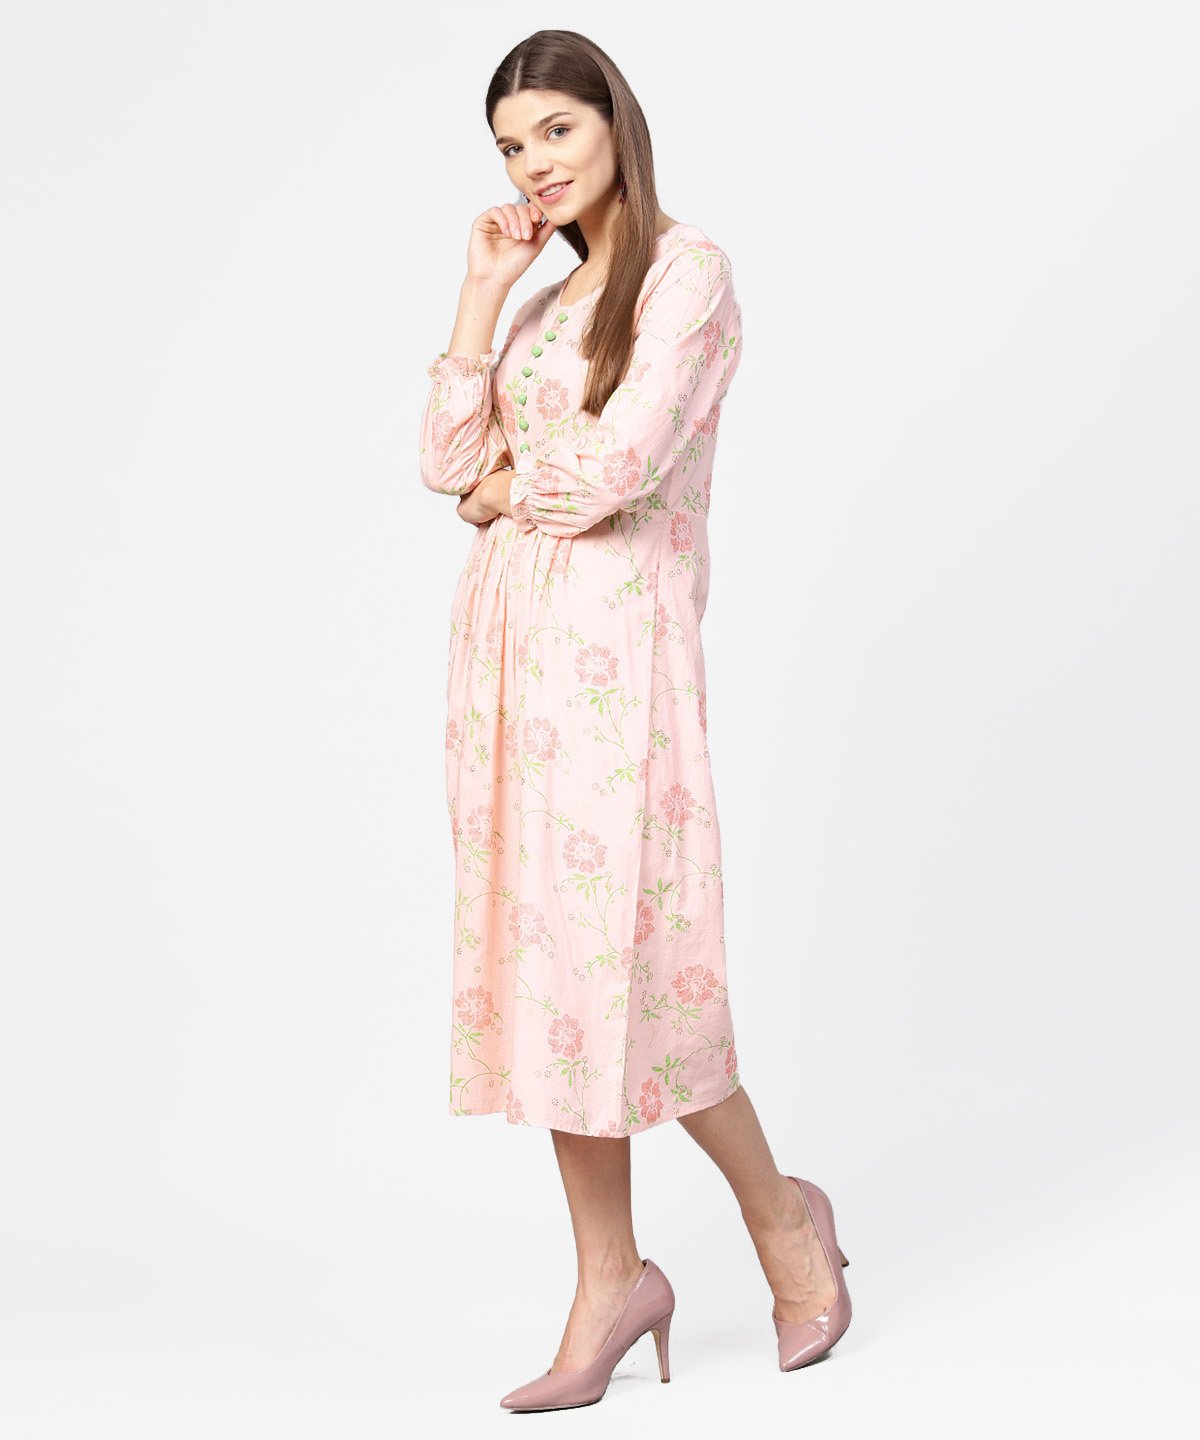 Women's Peach Printed 3/4Th Sleeve Cotton A-Line Dress - Nayo Clothing